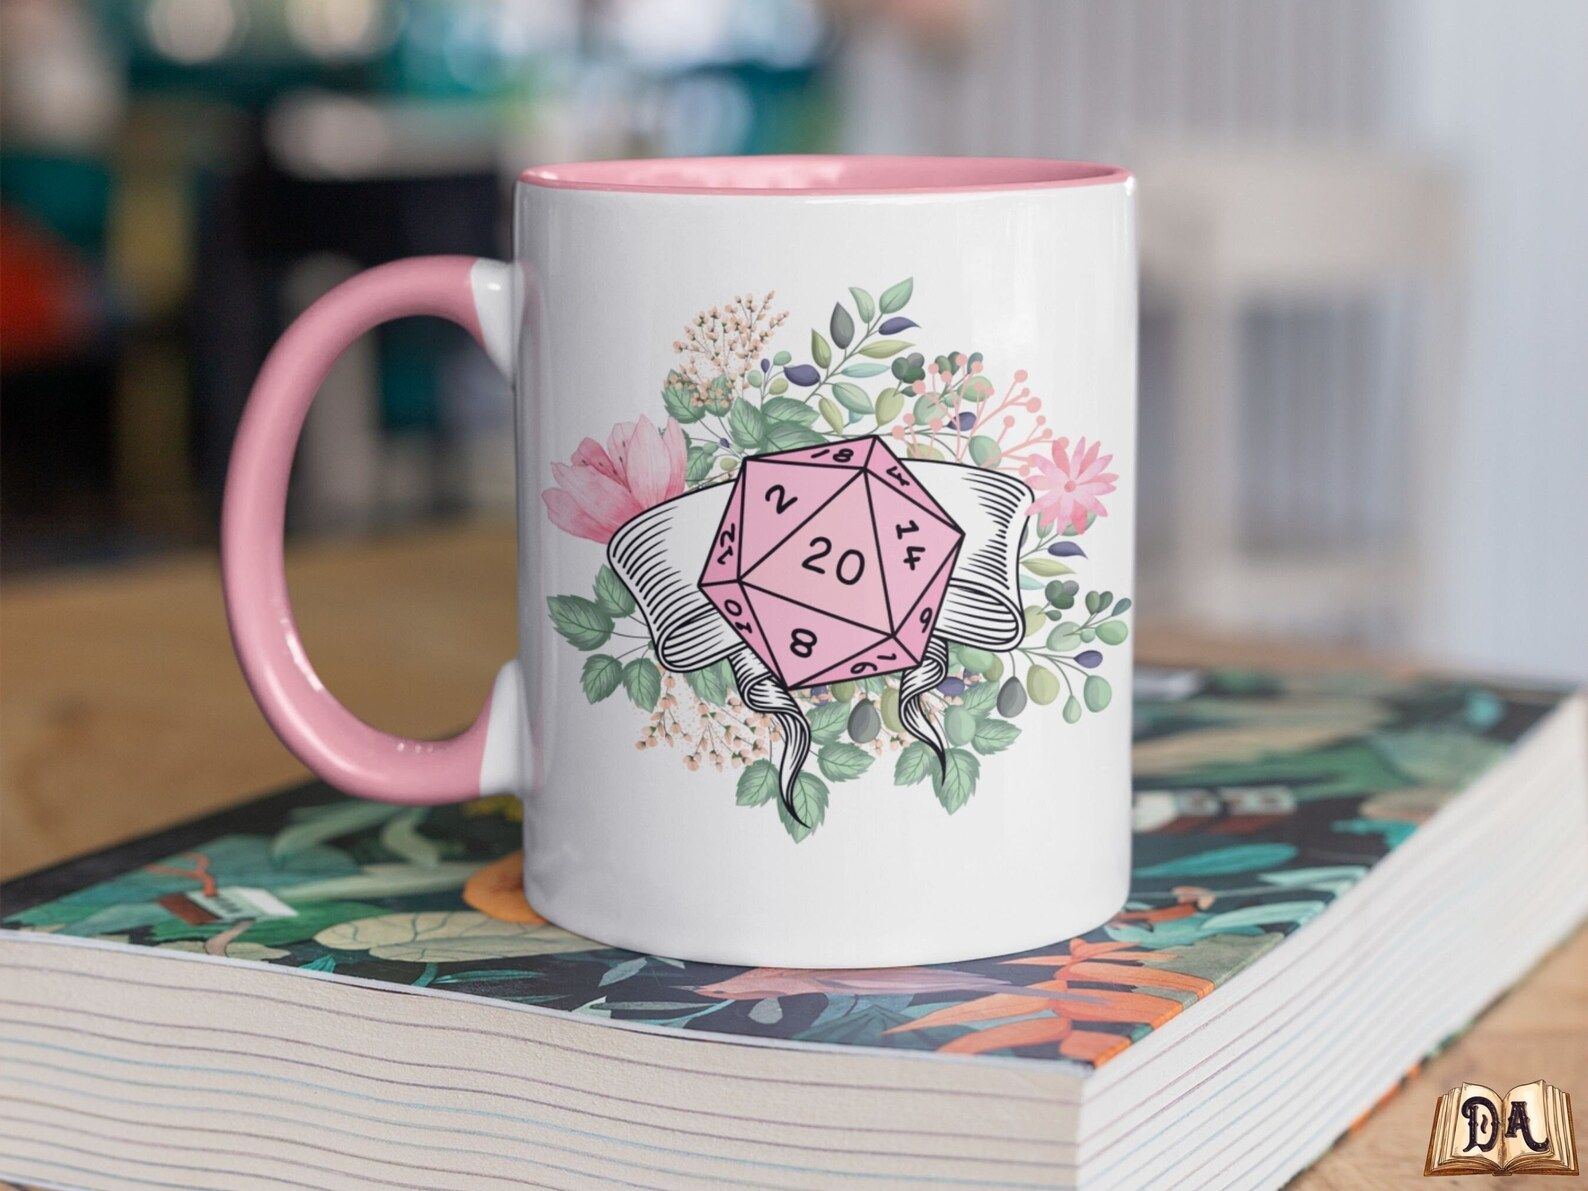 A white ceramic mug with a pink handle and interior has a 20 sided dice in front of flowers on the side. It sits on a book and a wooden table.